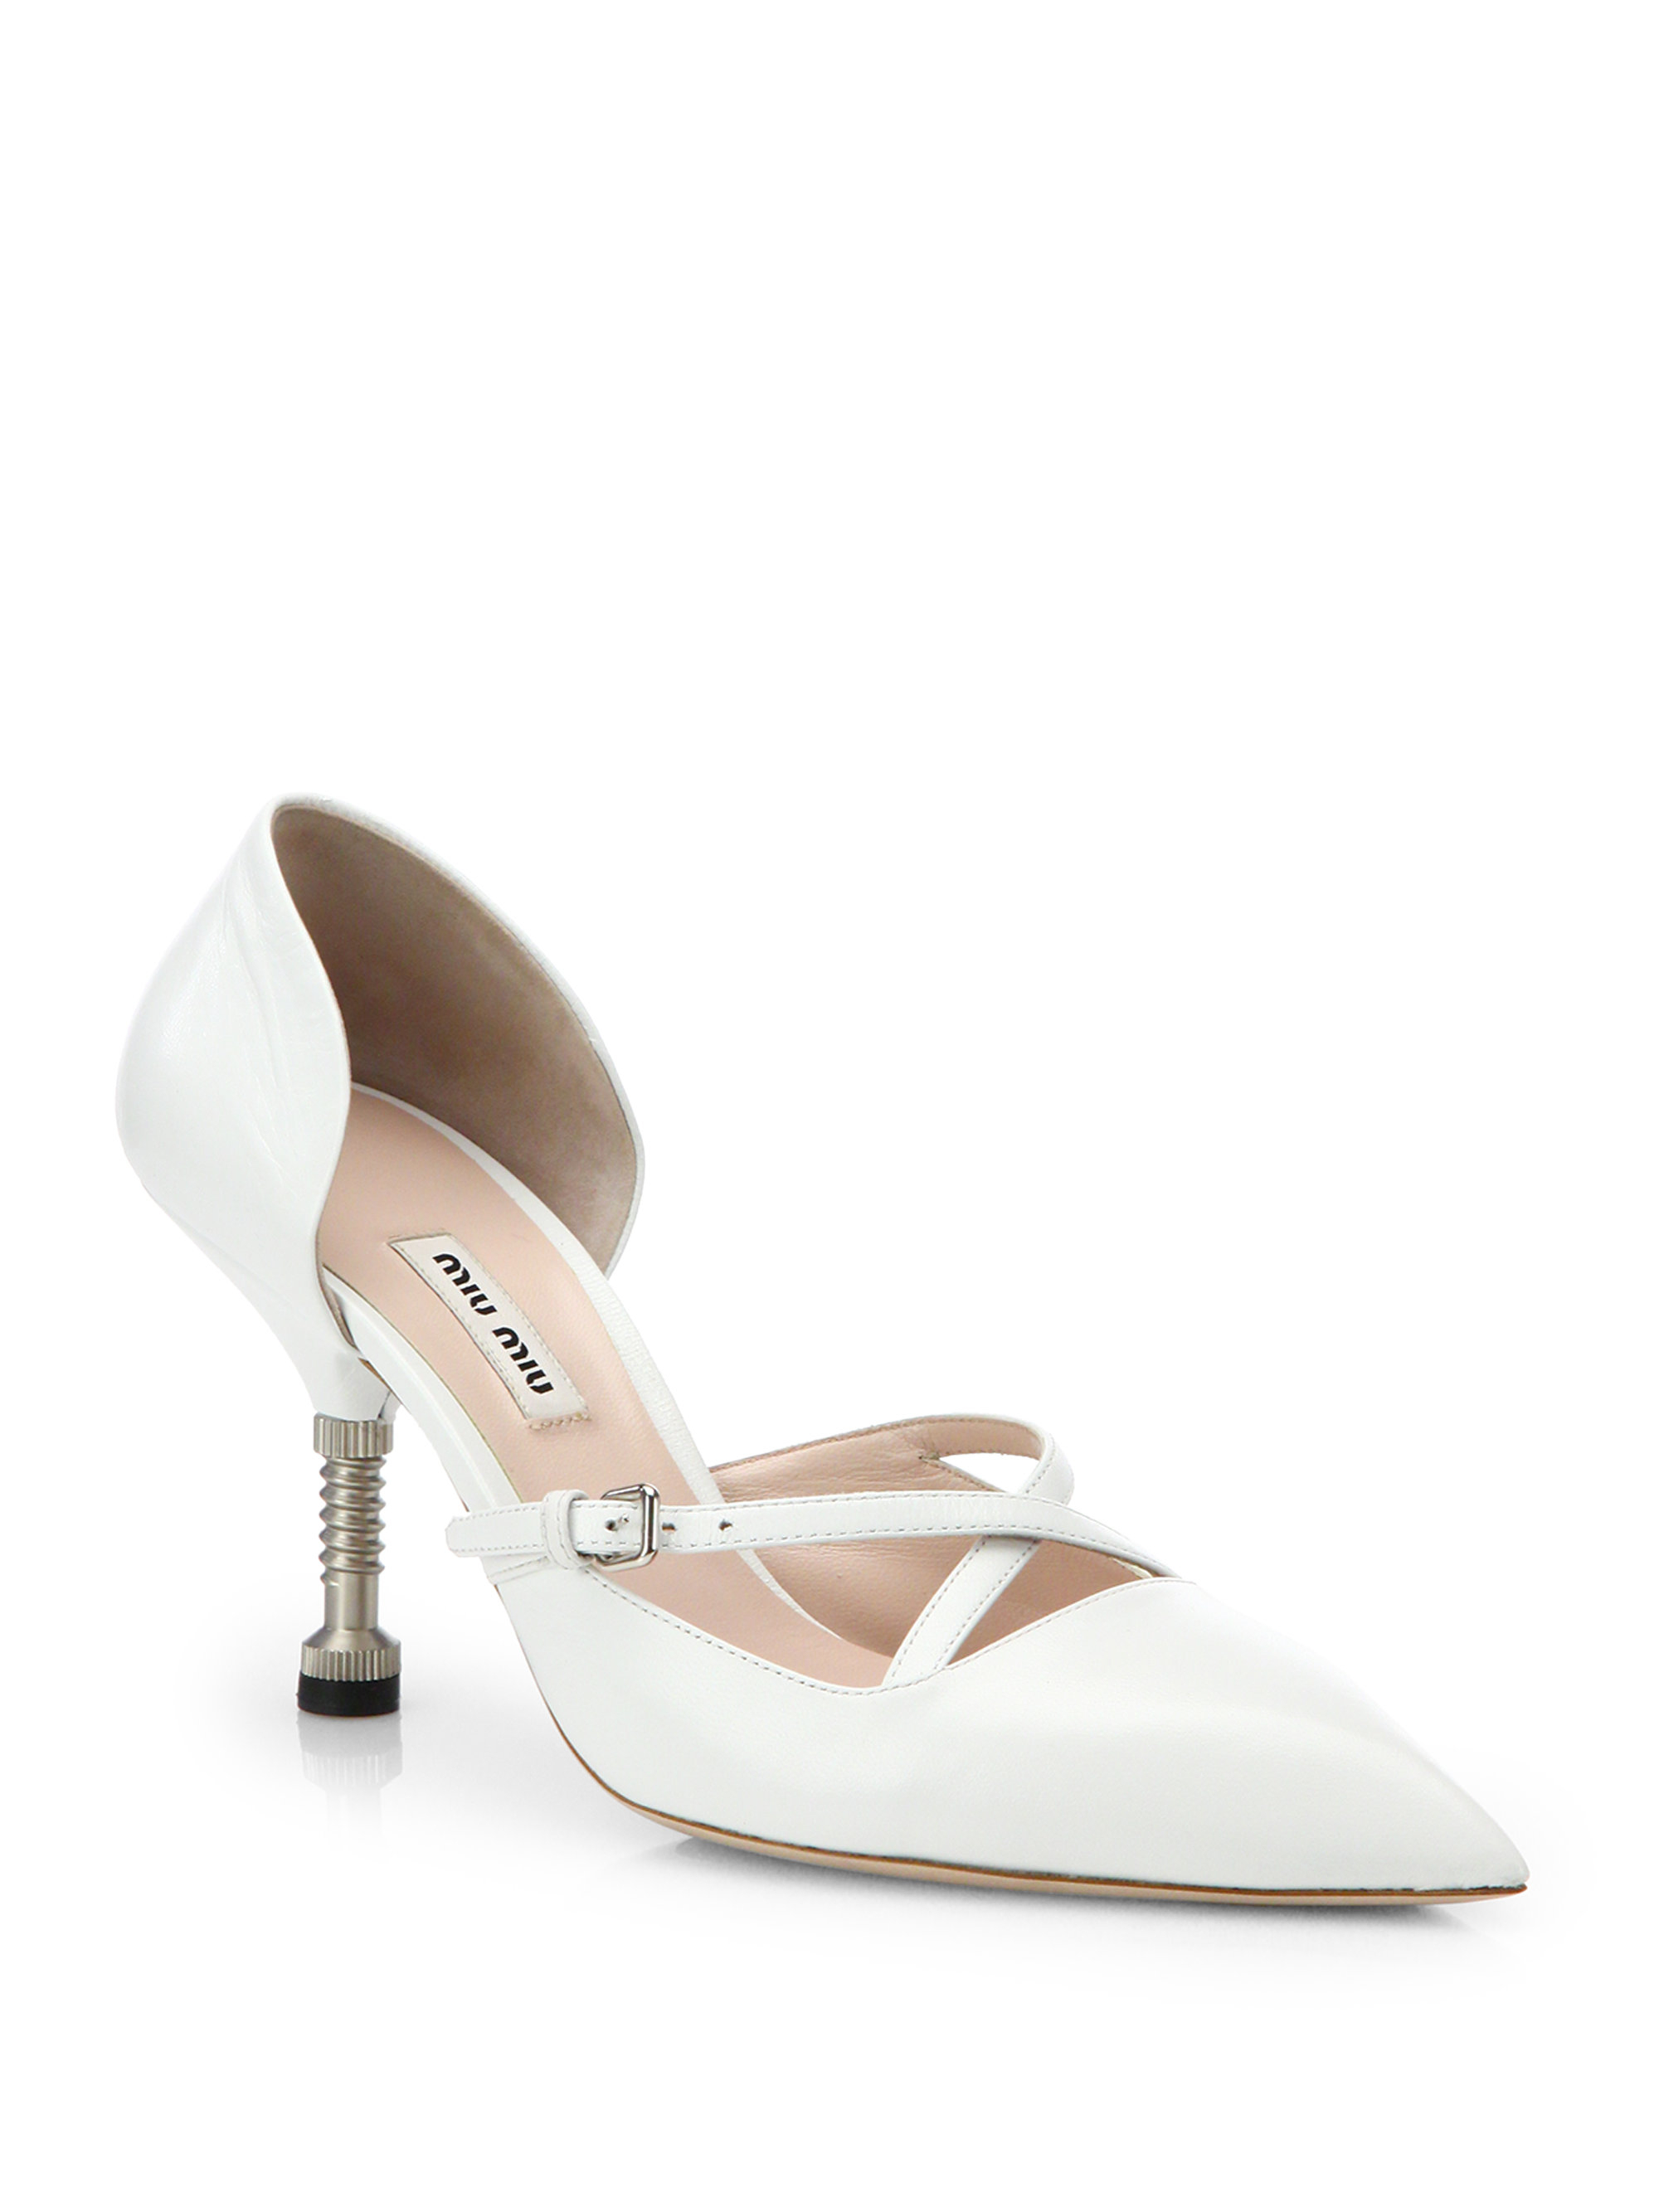 Lyst - Miu Miu Leather Point-Toe Metal Heel D'Orsay Pumps in White